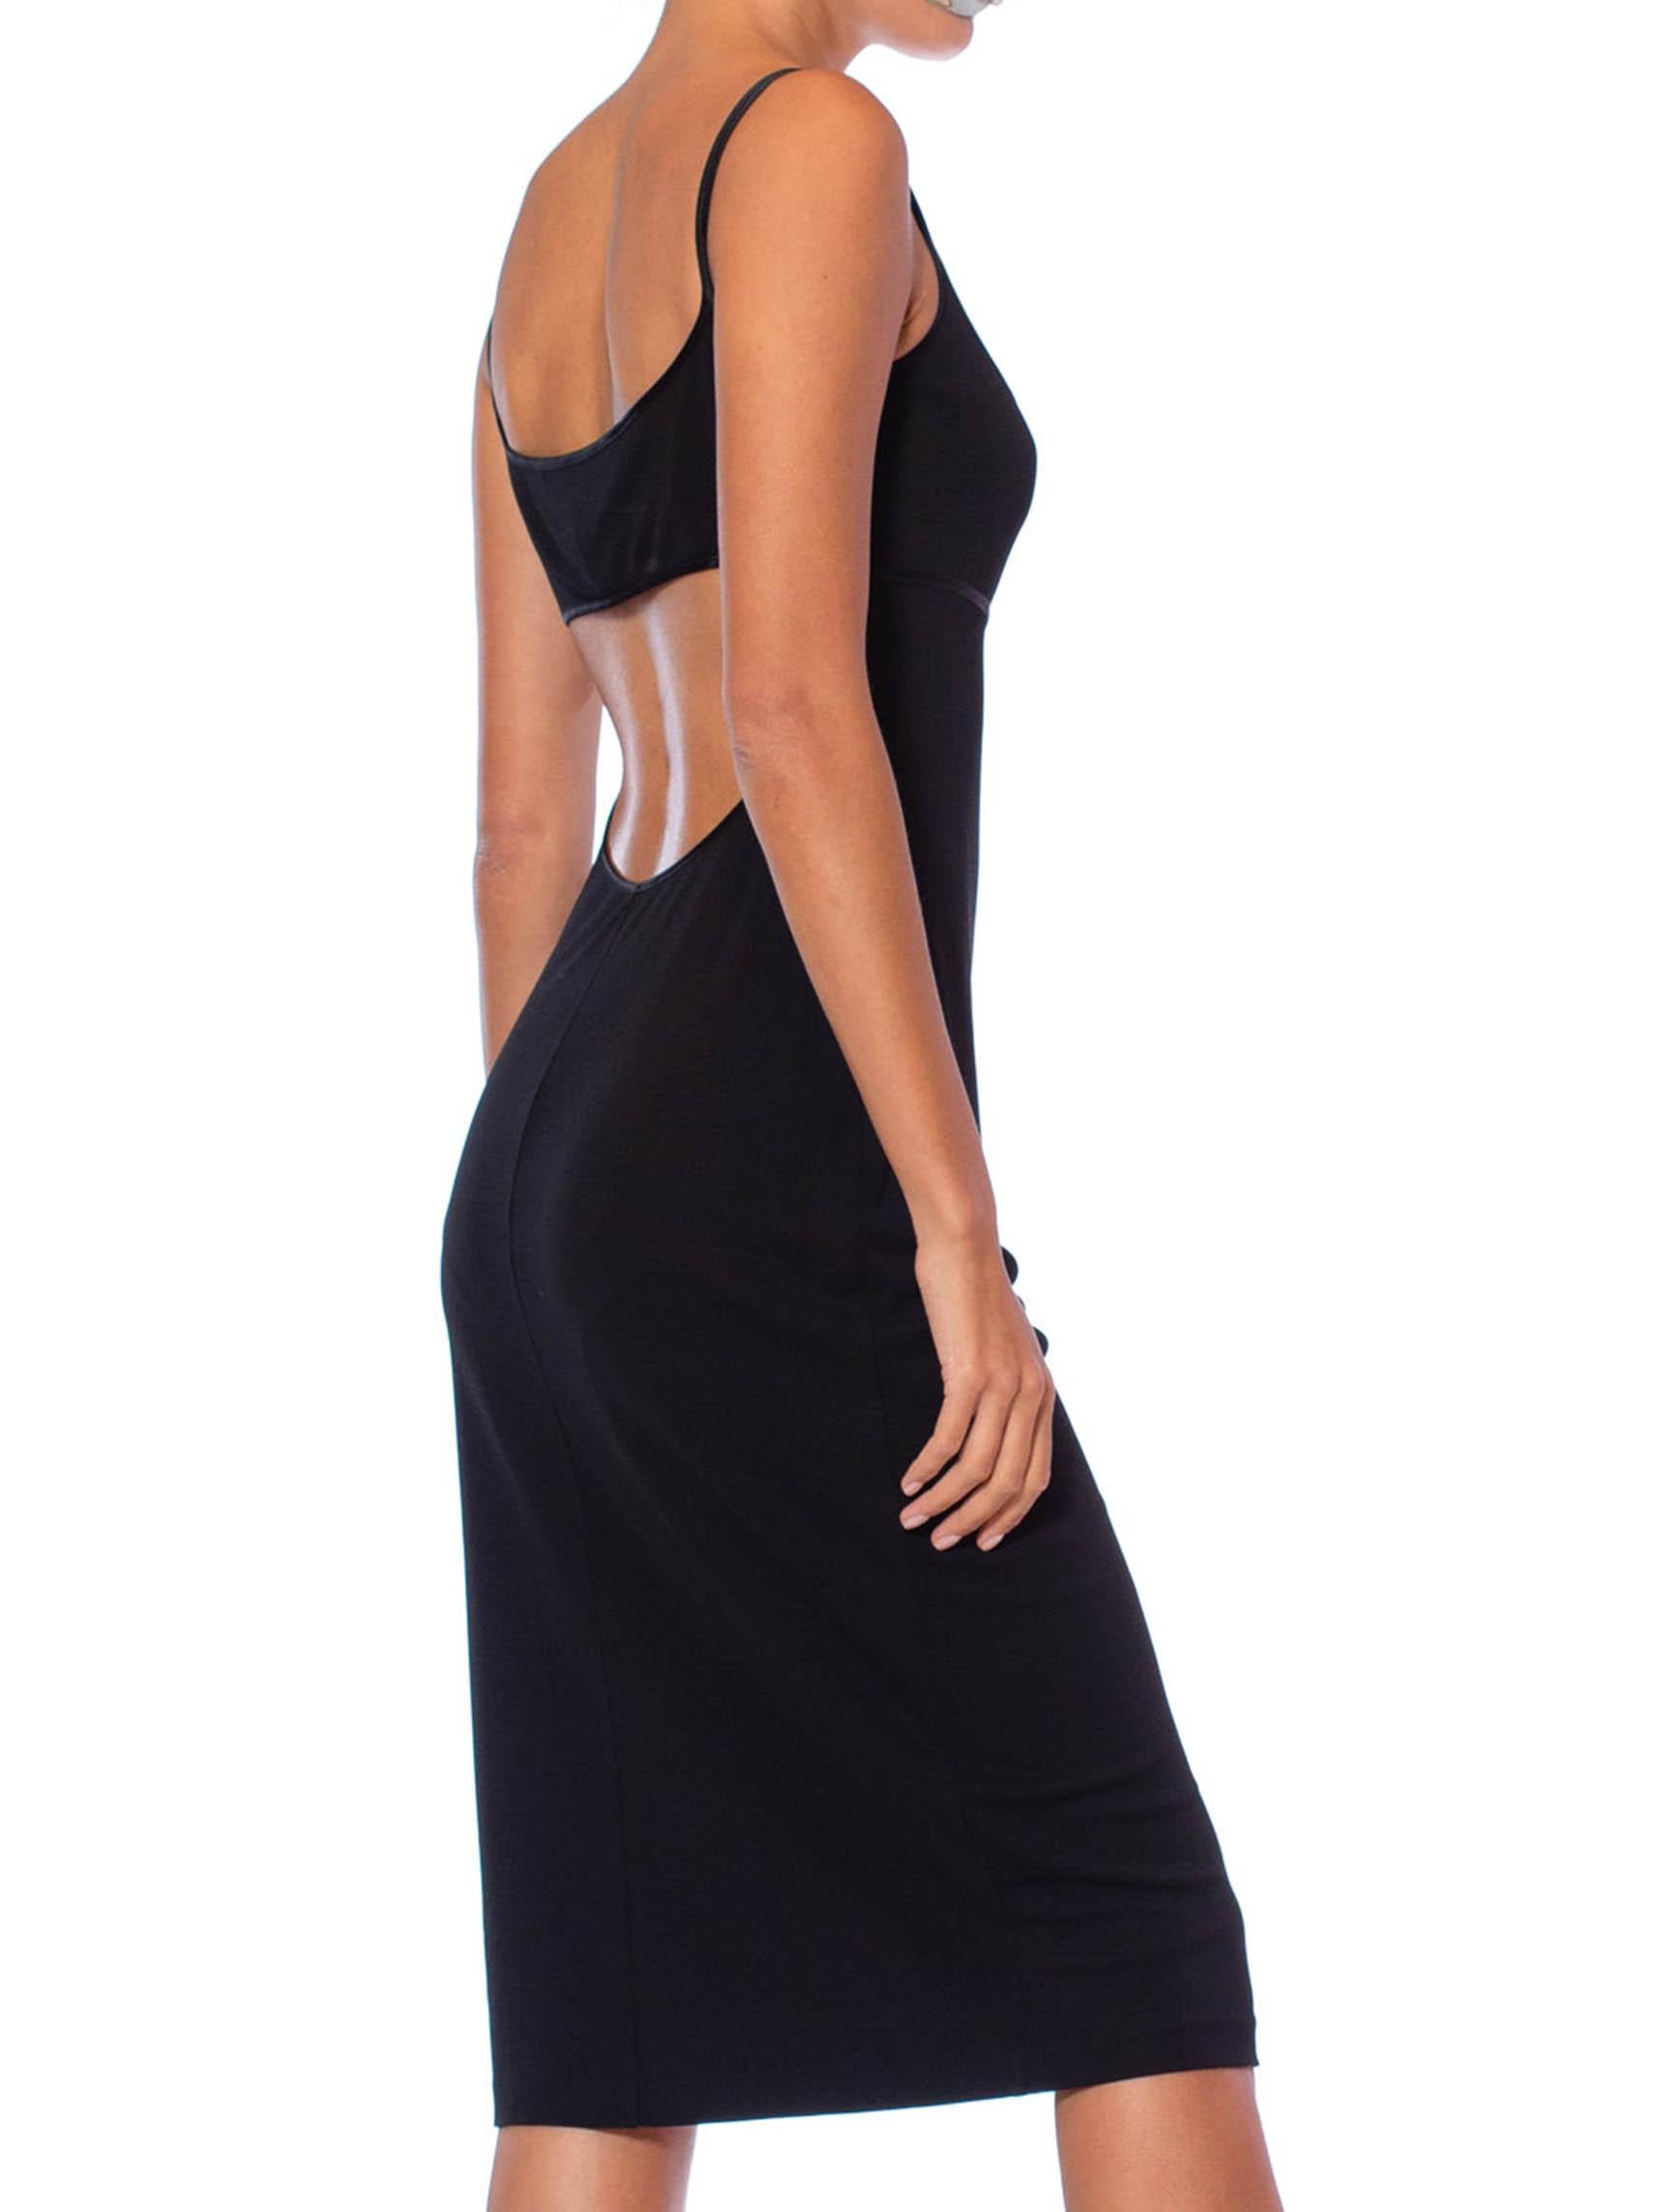 1990S RICHARD TYLER Black Rayon Jersey Open Back Body-Con Cocktail Dress With Satin Trim